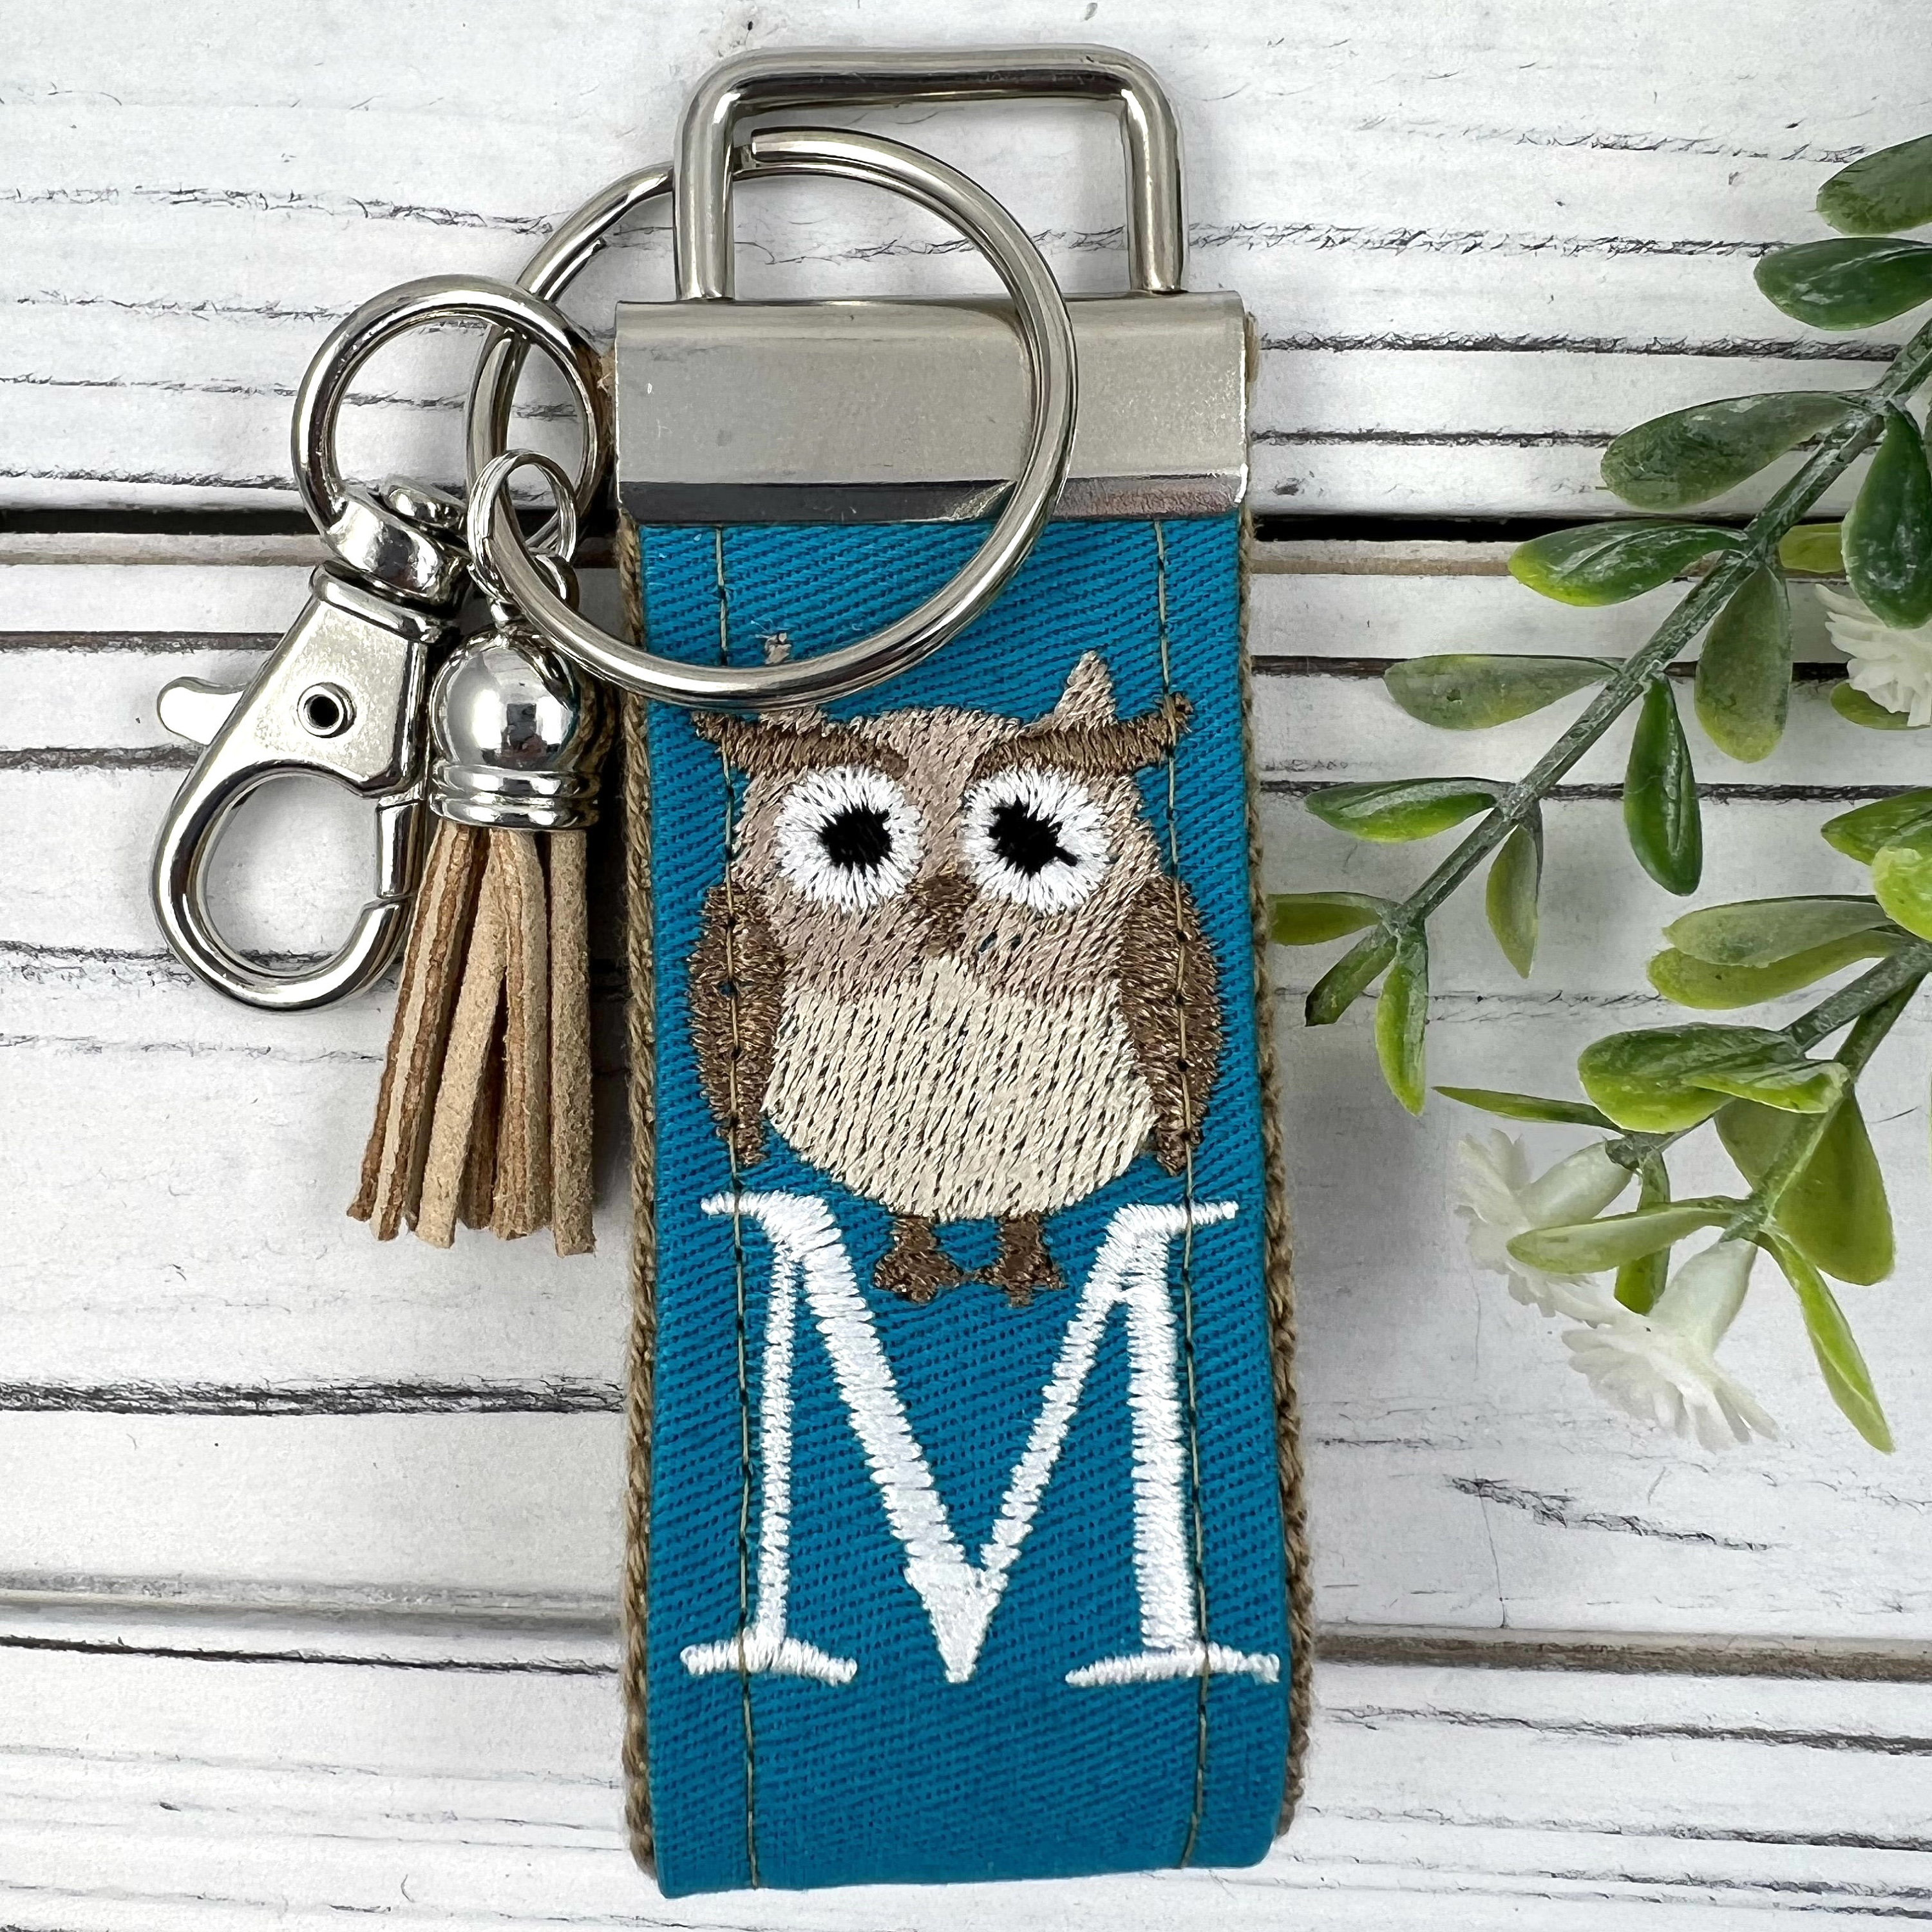 Genuine Leather Keychain/bag-charm, a Savvy Owl Face Pattern, Brown or Green